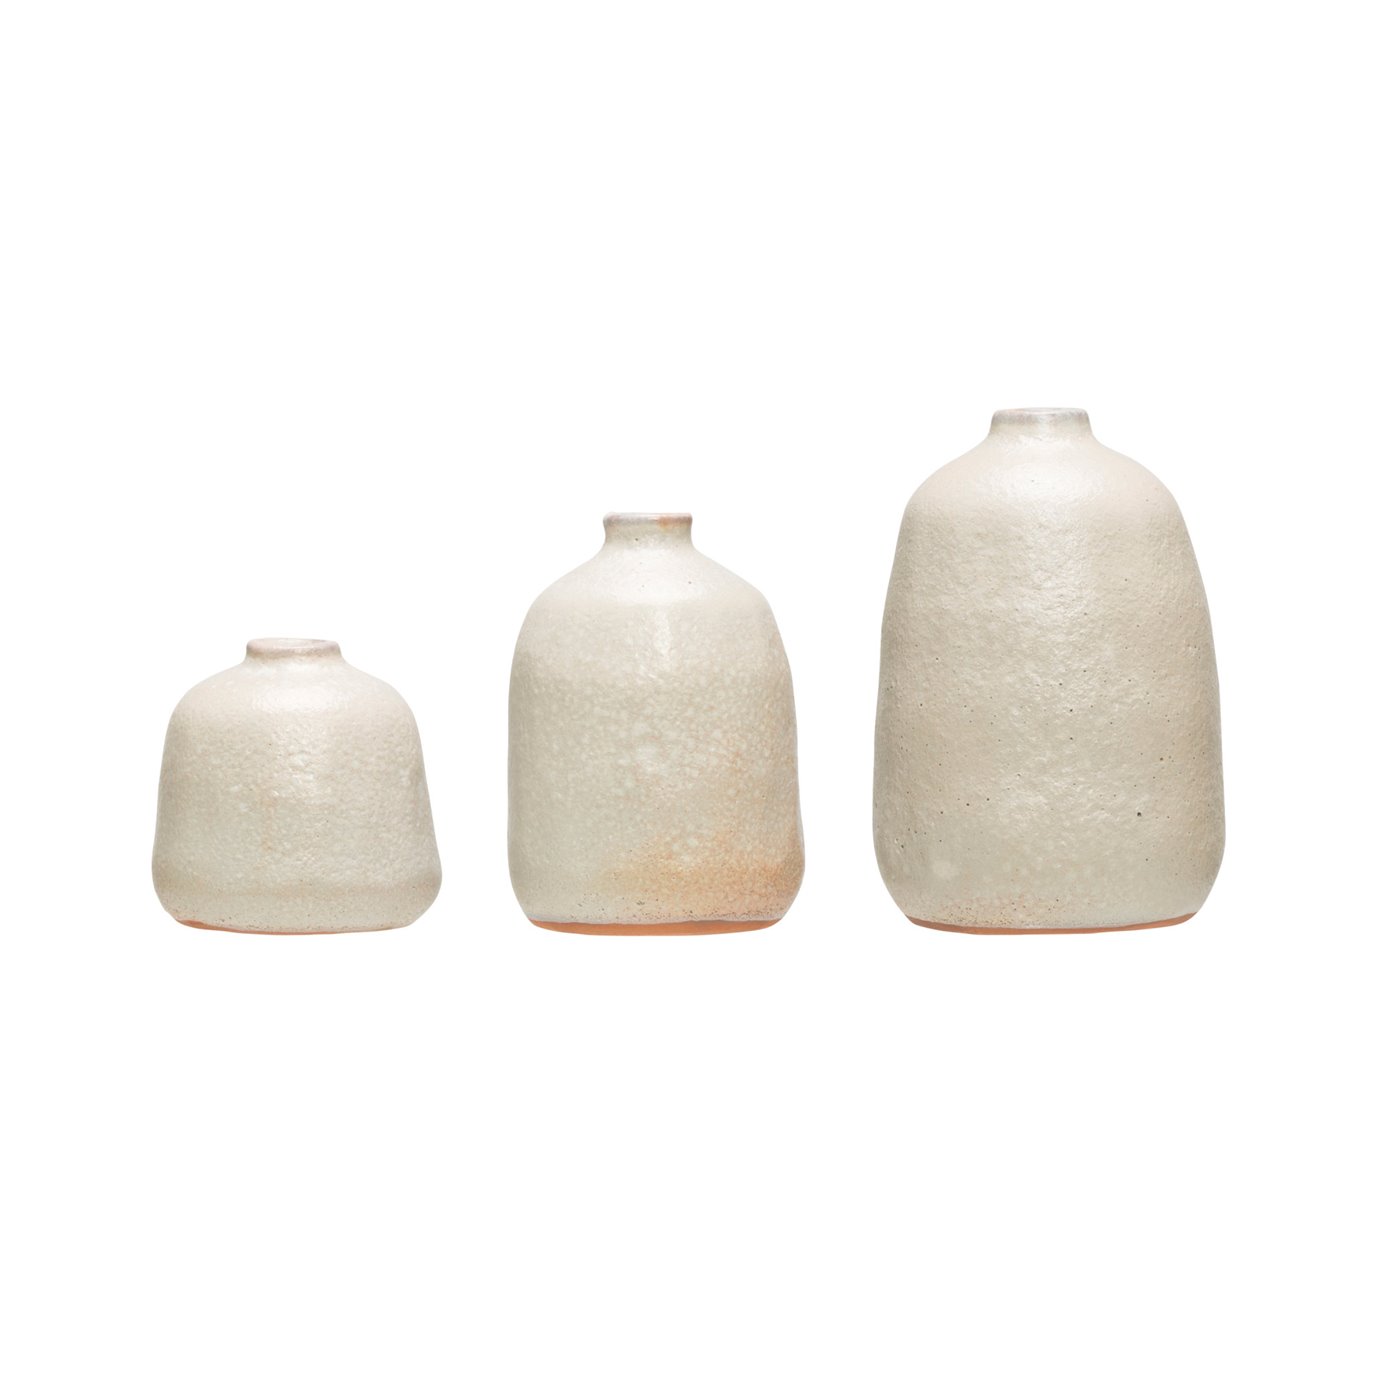 Light Grey Terracotta Vases with Pitted Sand Finishes (Set of 3 Sizes)